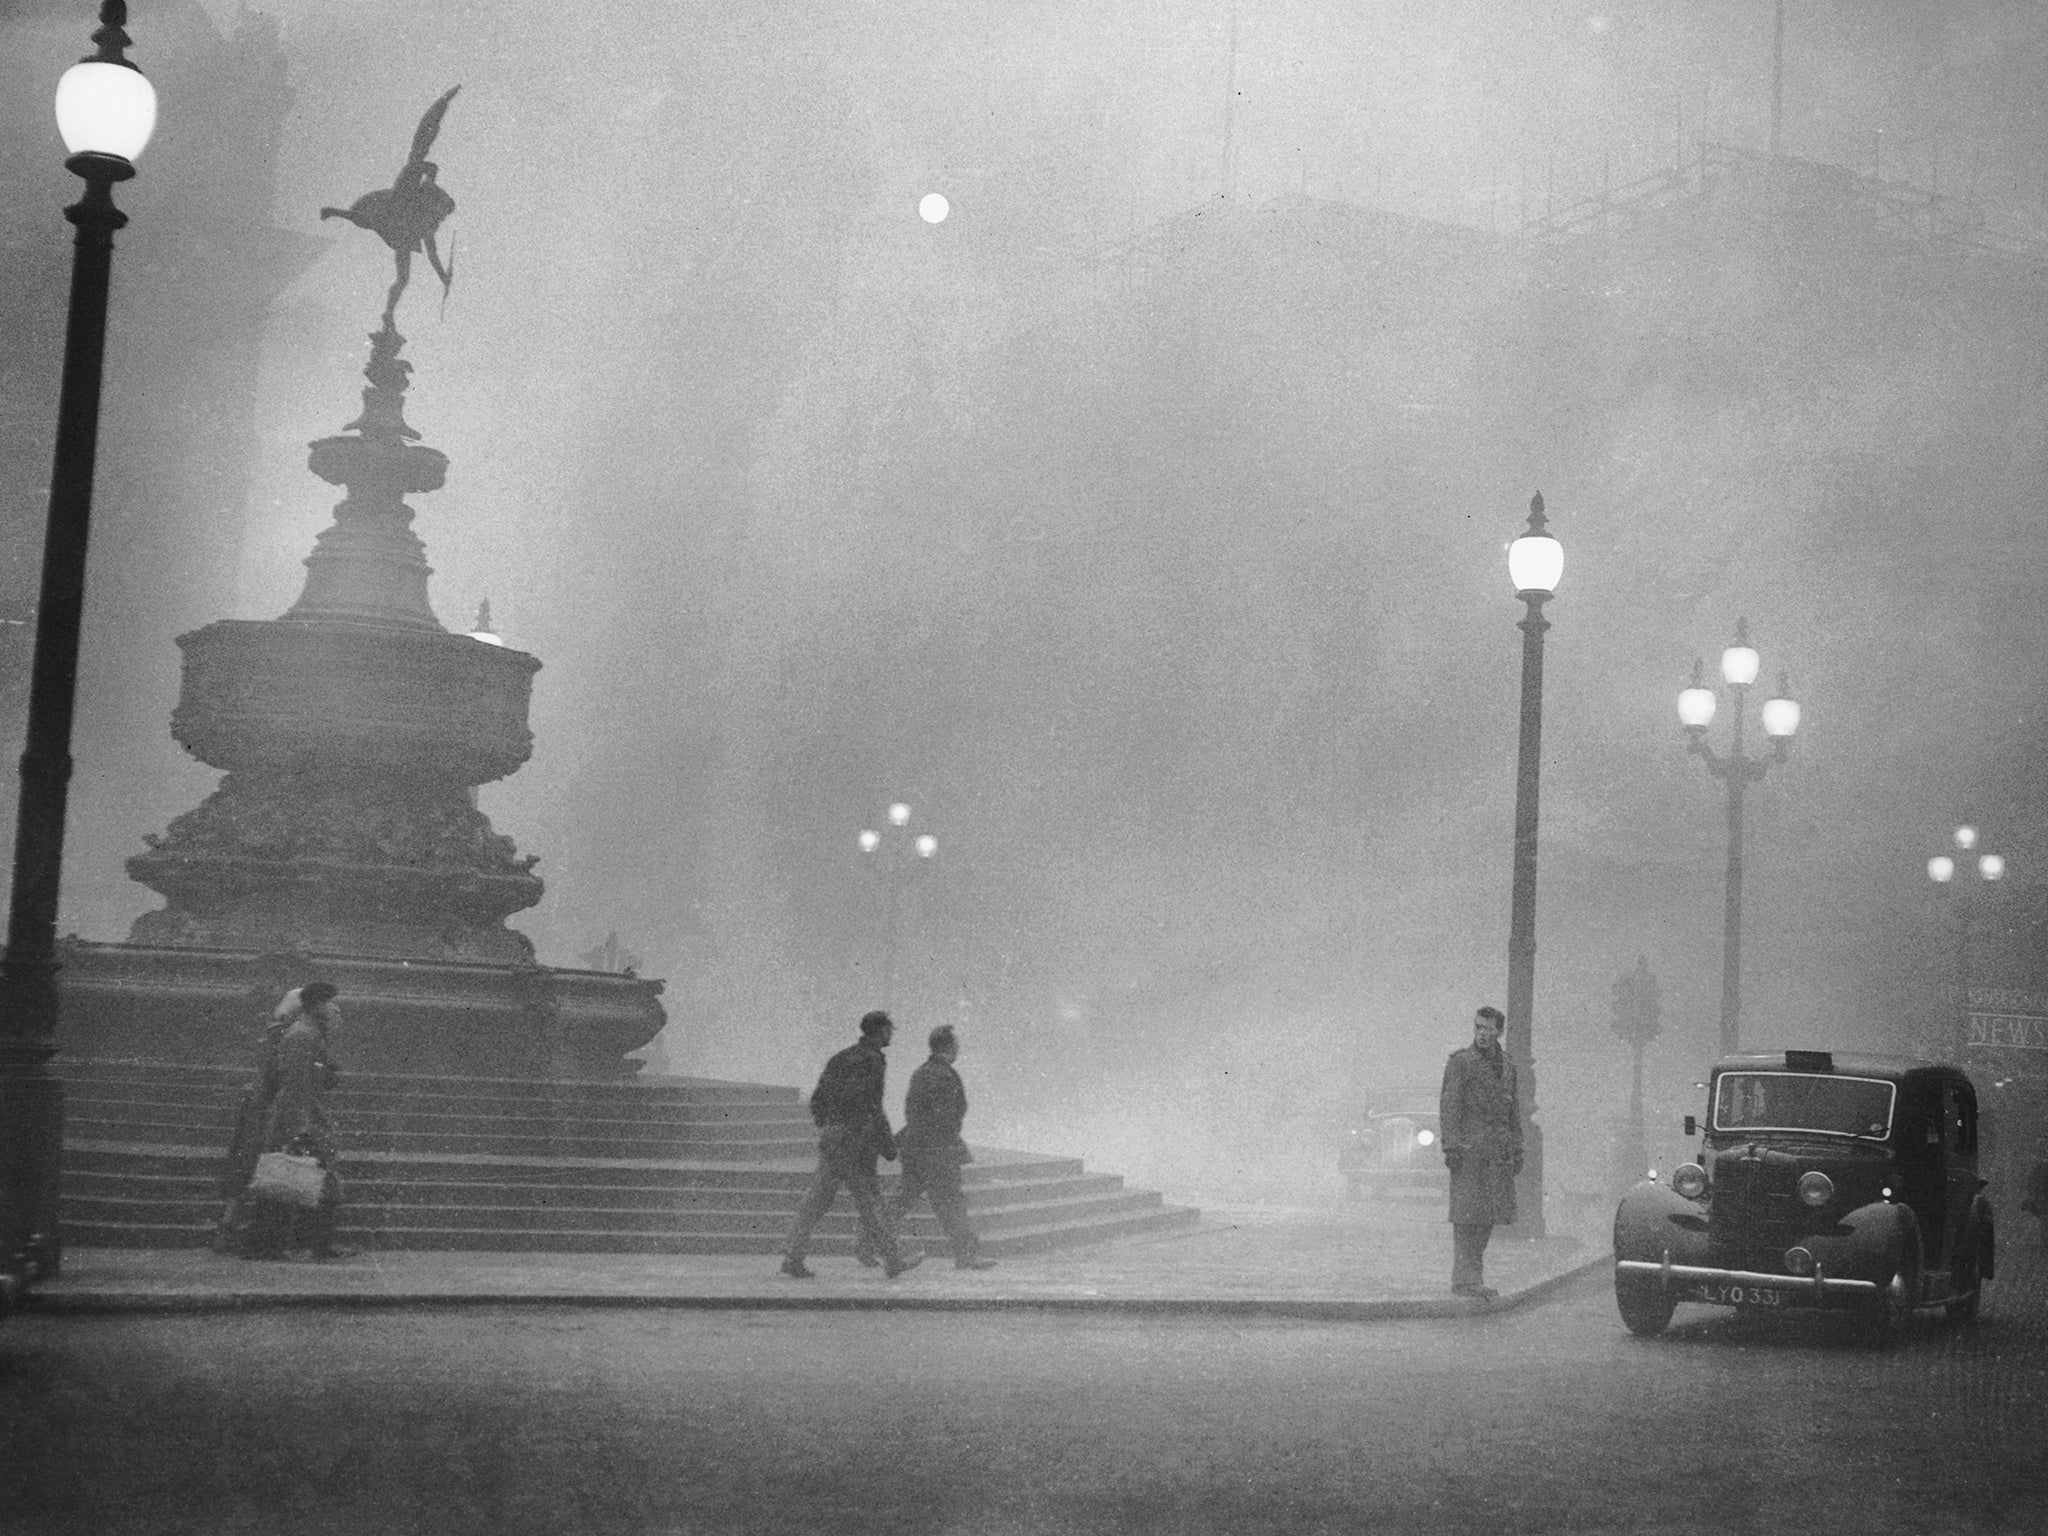 London’s Piccadilly Circus in 1952, where the only thing we had to worry about was occasional smog